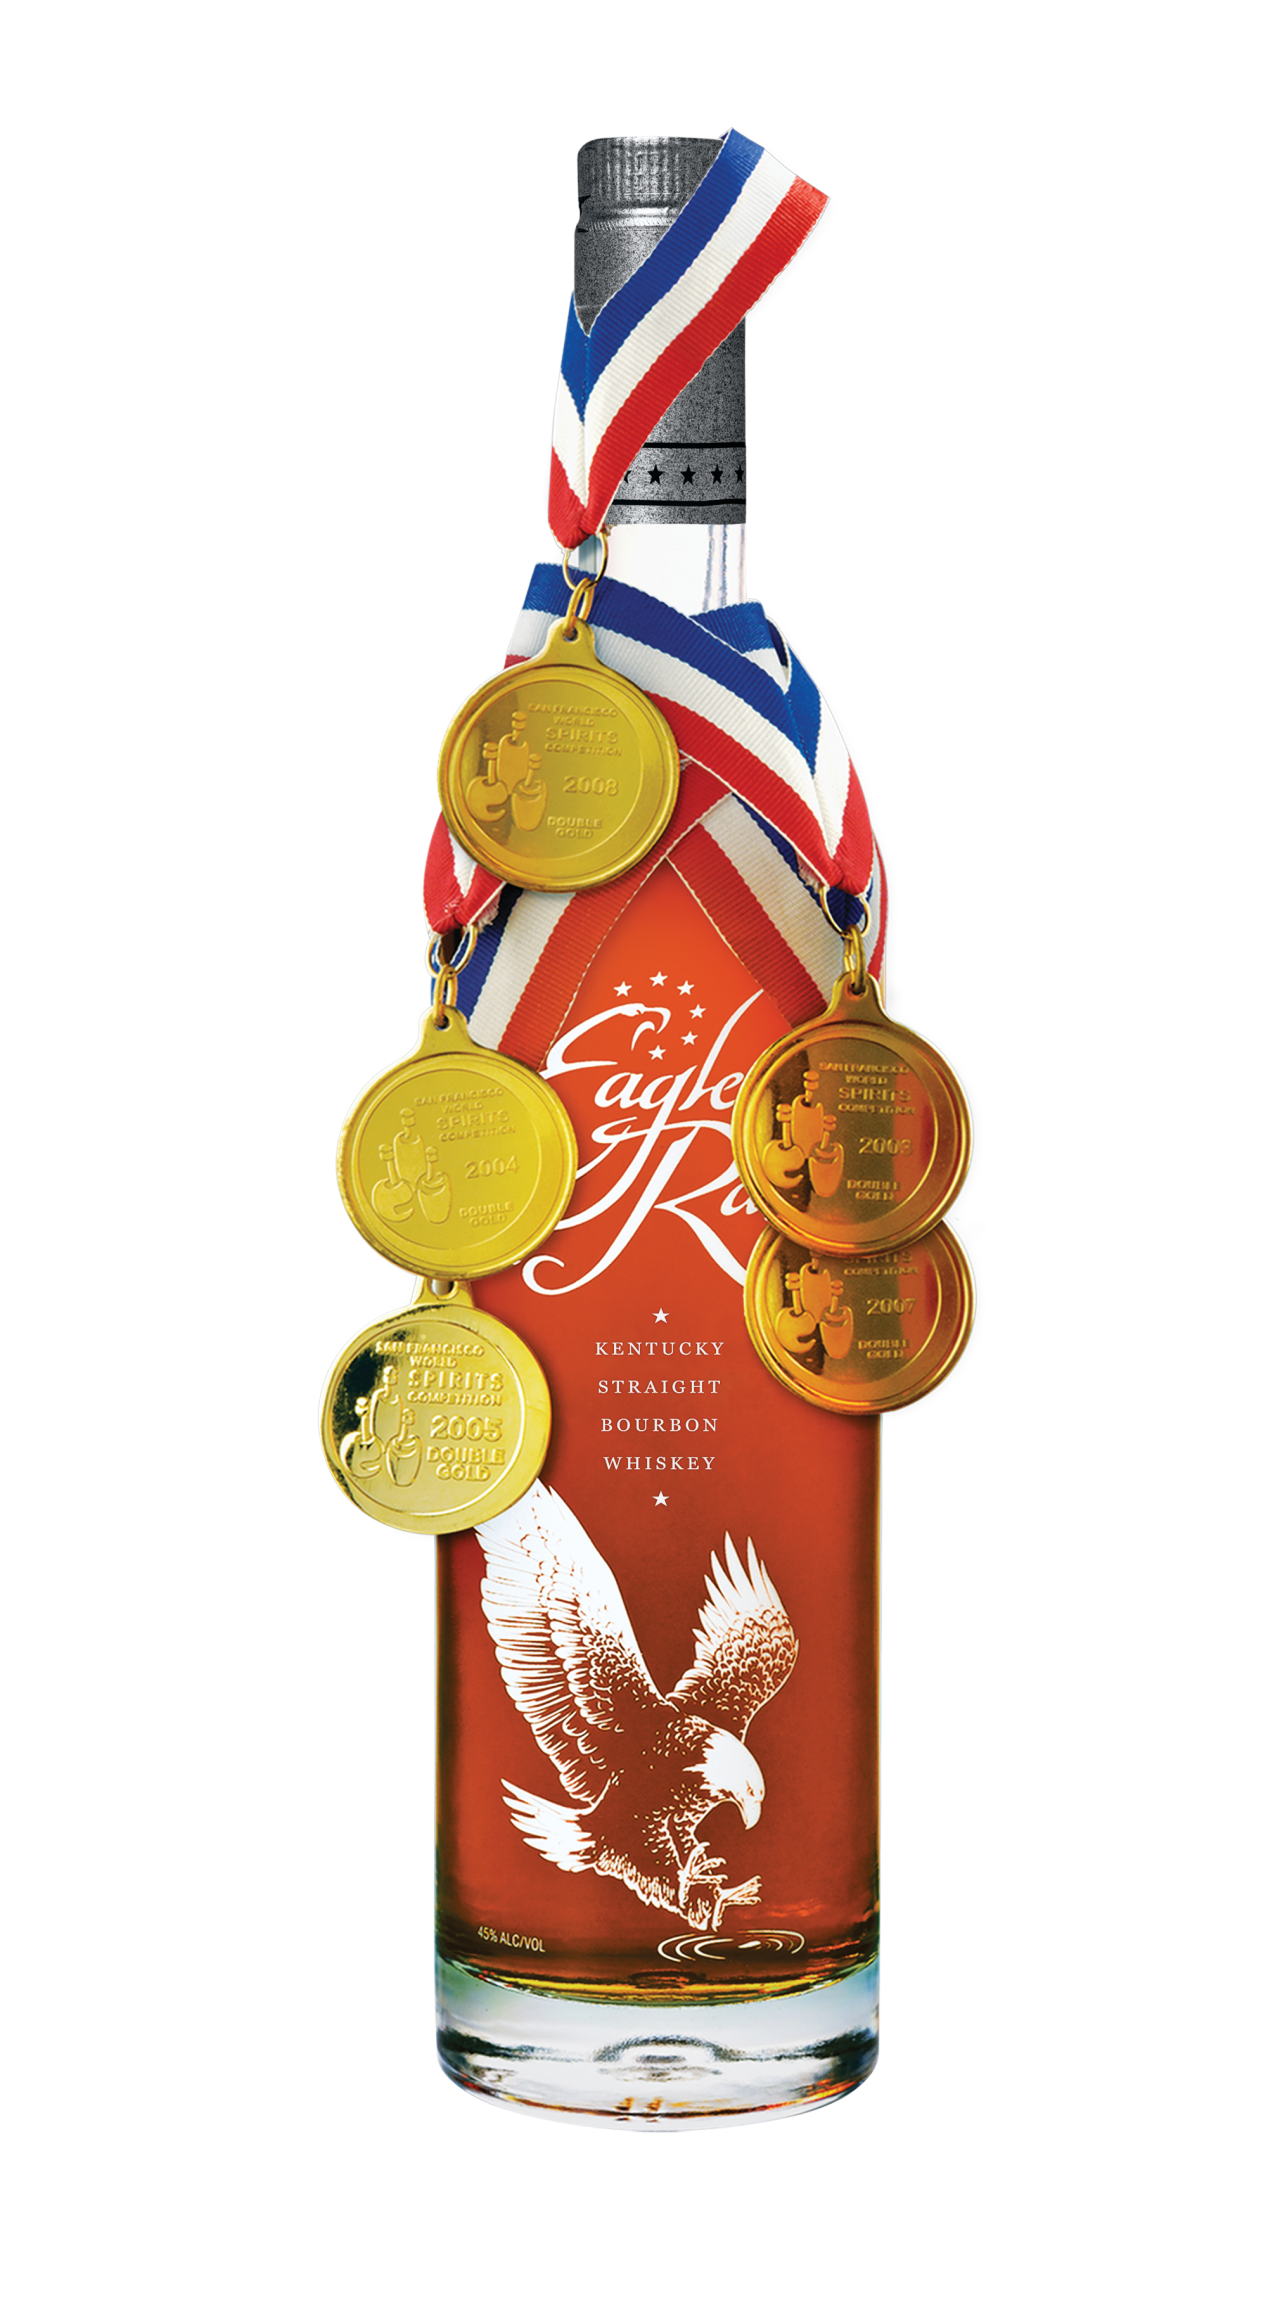 Eagle Rare is the only bourbon to ever win the double gold medal five times at the San Francisco World Spirits Competition.